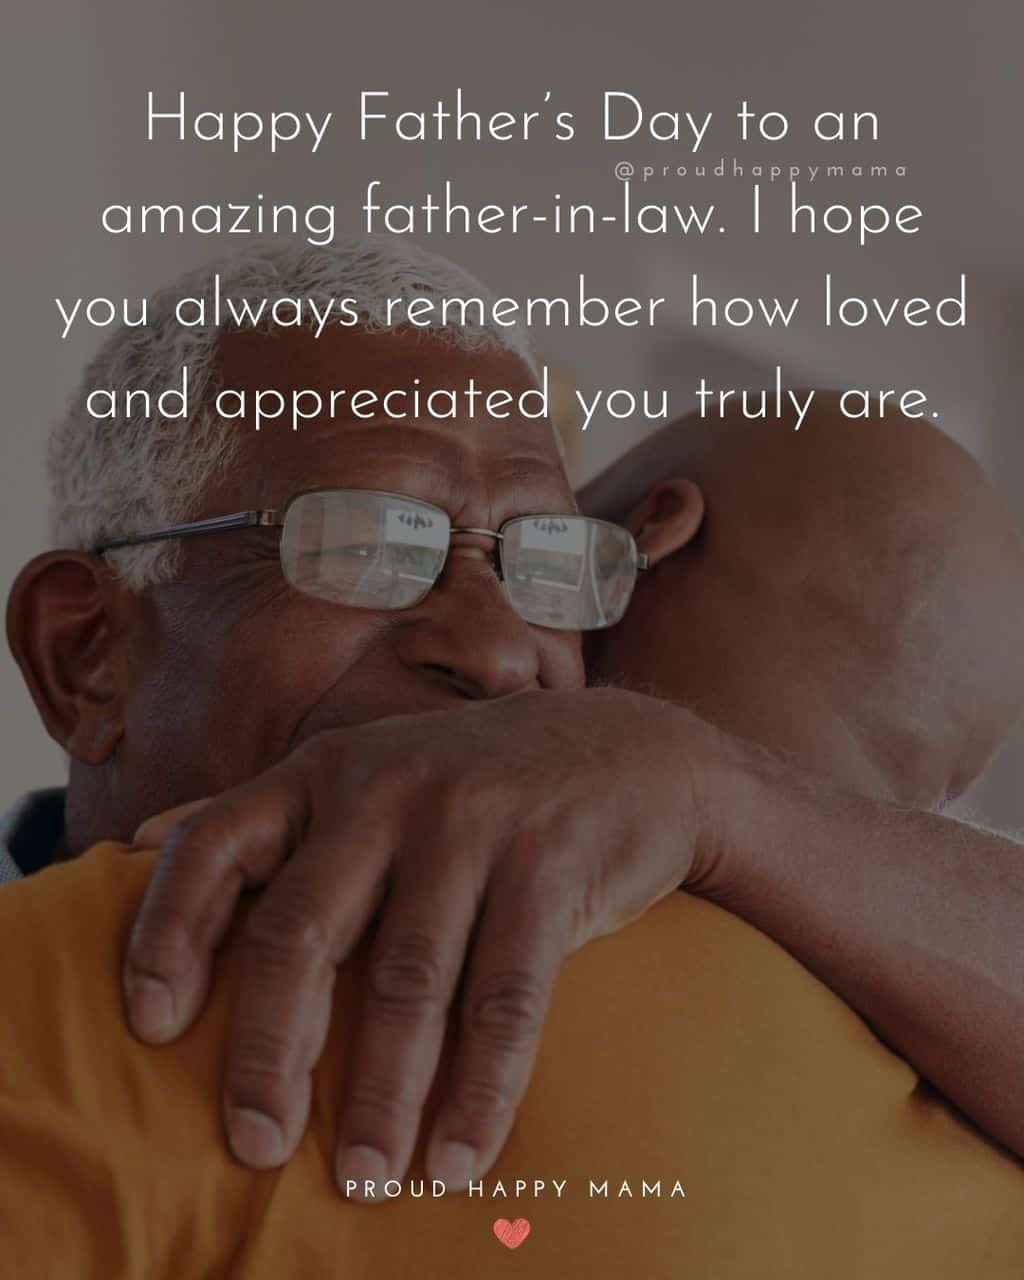 Happy Fathers Day Quotes For Father In Law - Happy Father’s Day to an amazing father in law. I hope you always remember